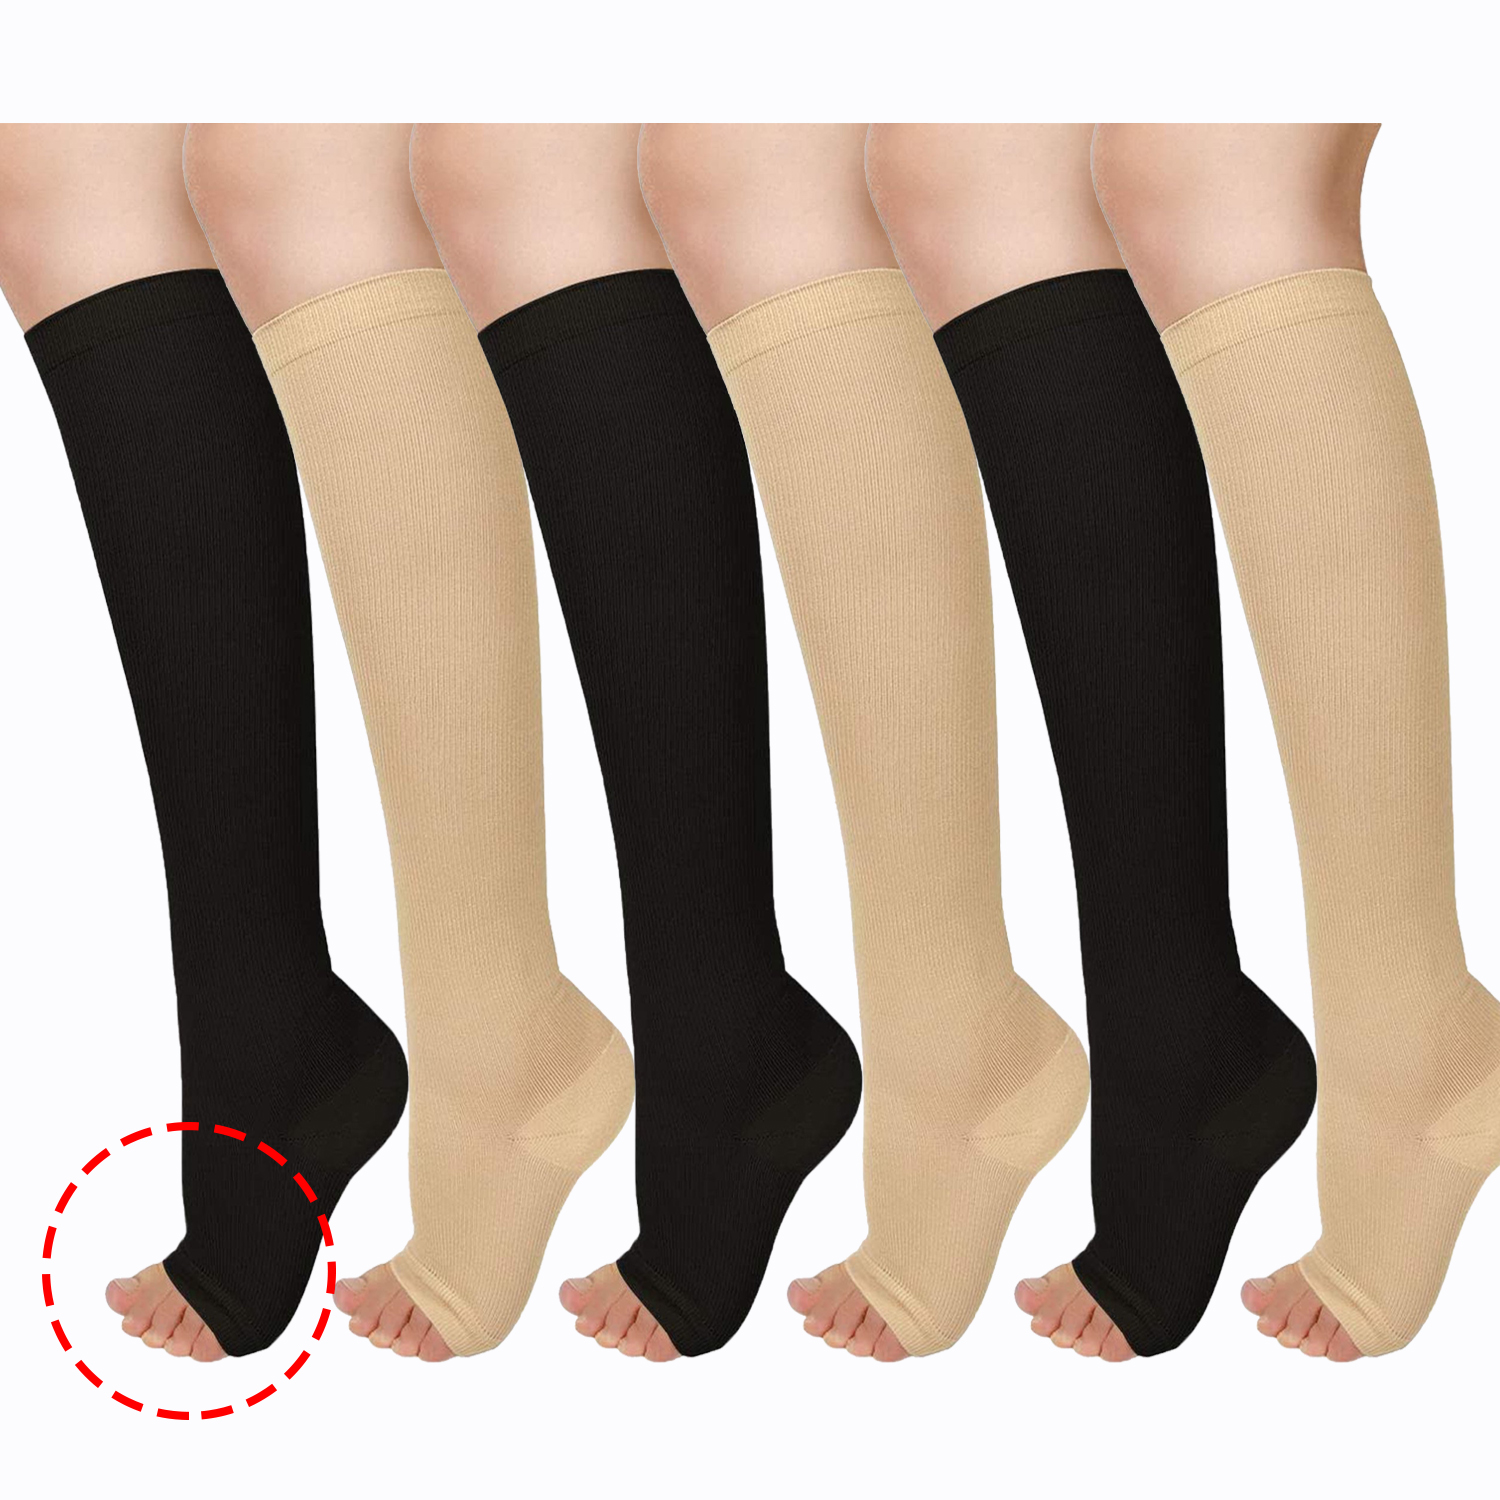 Wukang 6 Pairs Knee High Compression Stockings Open Toe 15-20mmhg ...